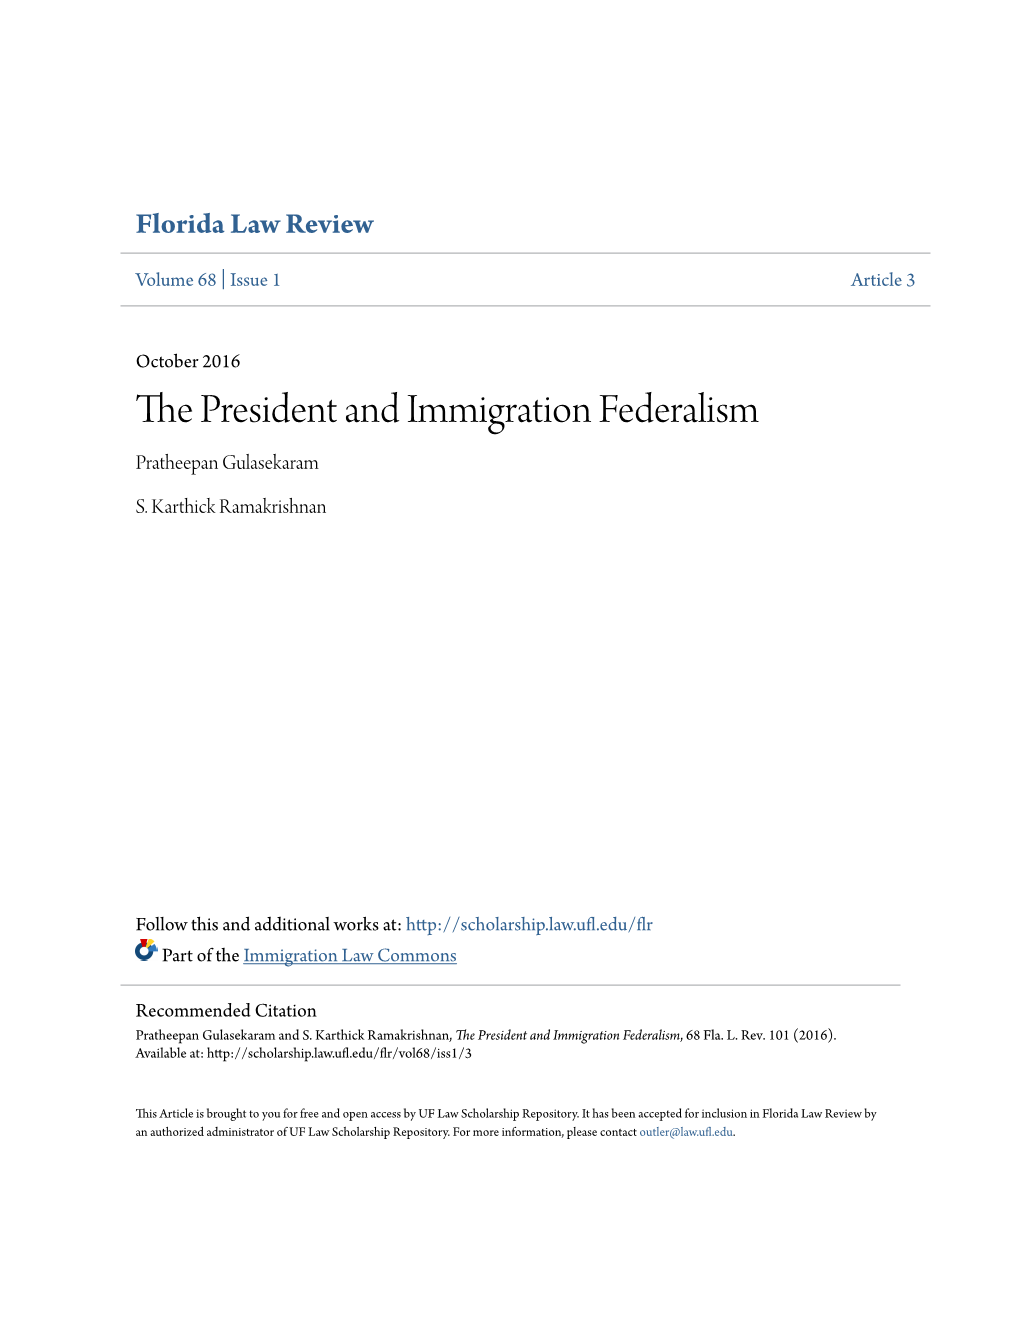 The President and Immigration Federalism, 68 Fla